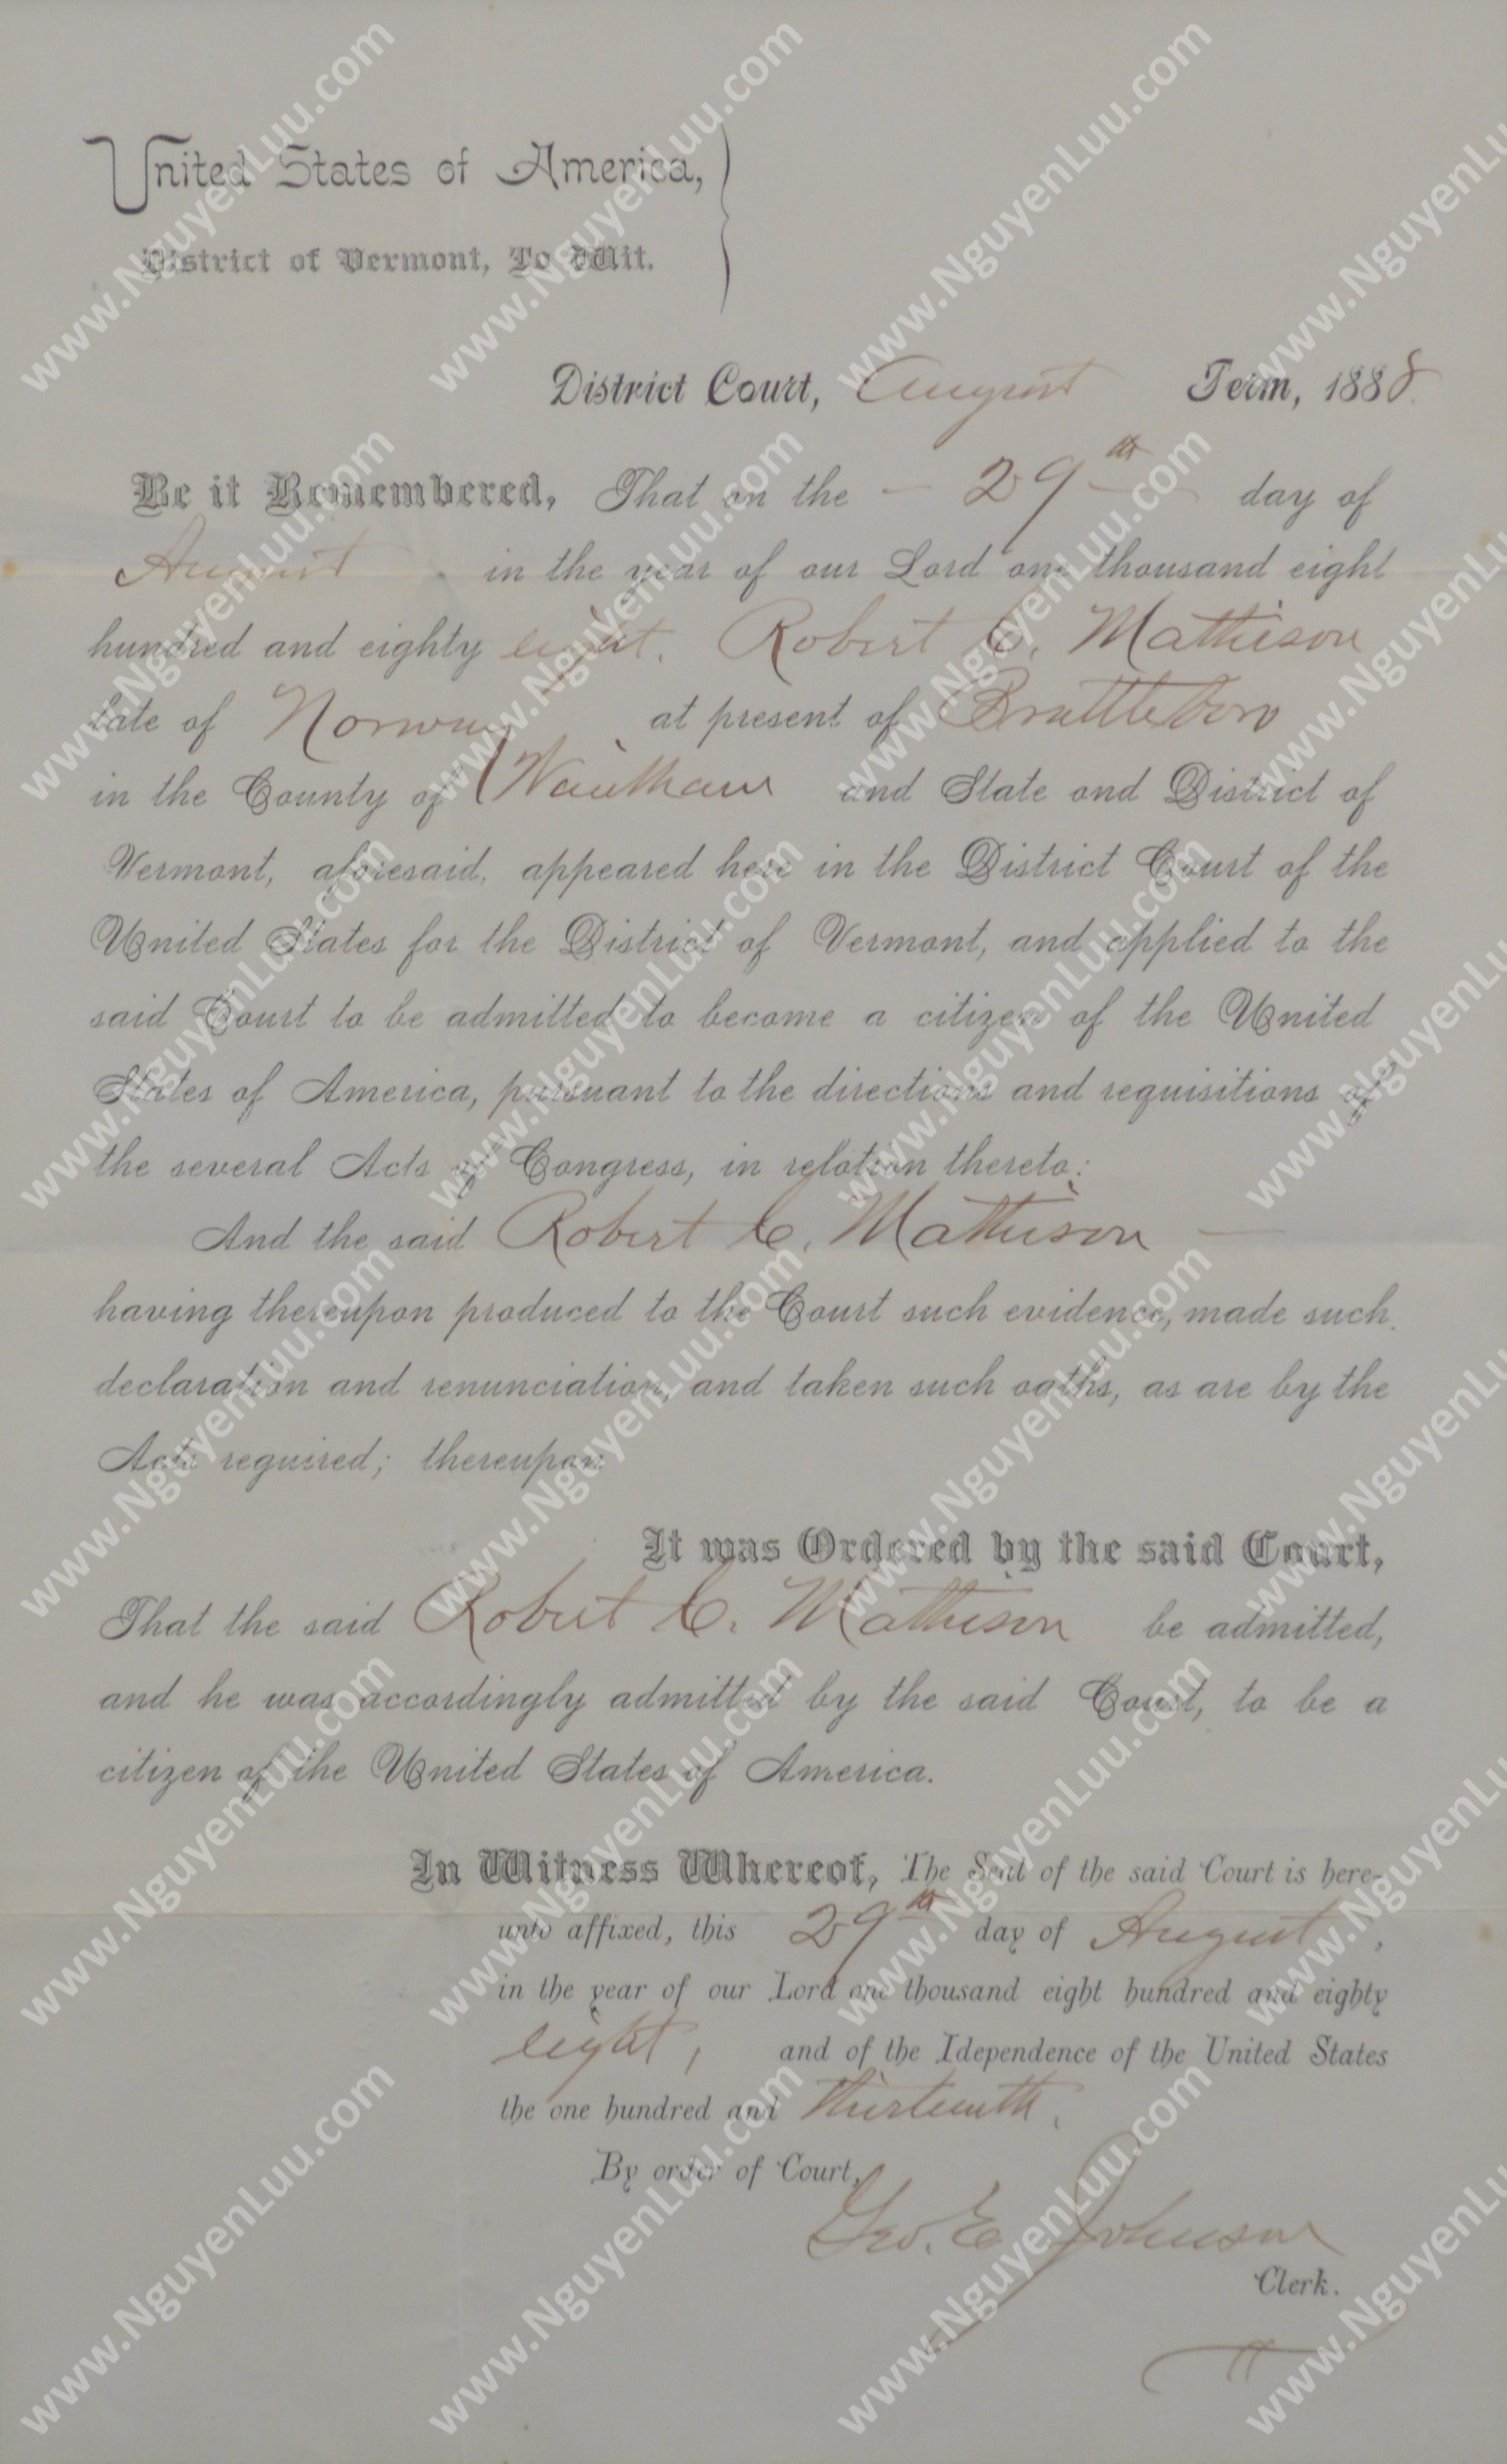 U.S. Certificate of Citizenship issued in the State of Vermont in 1888